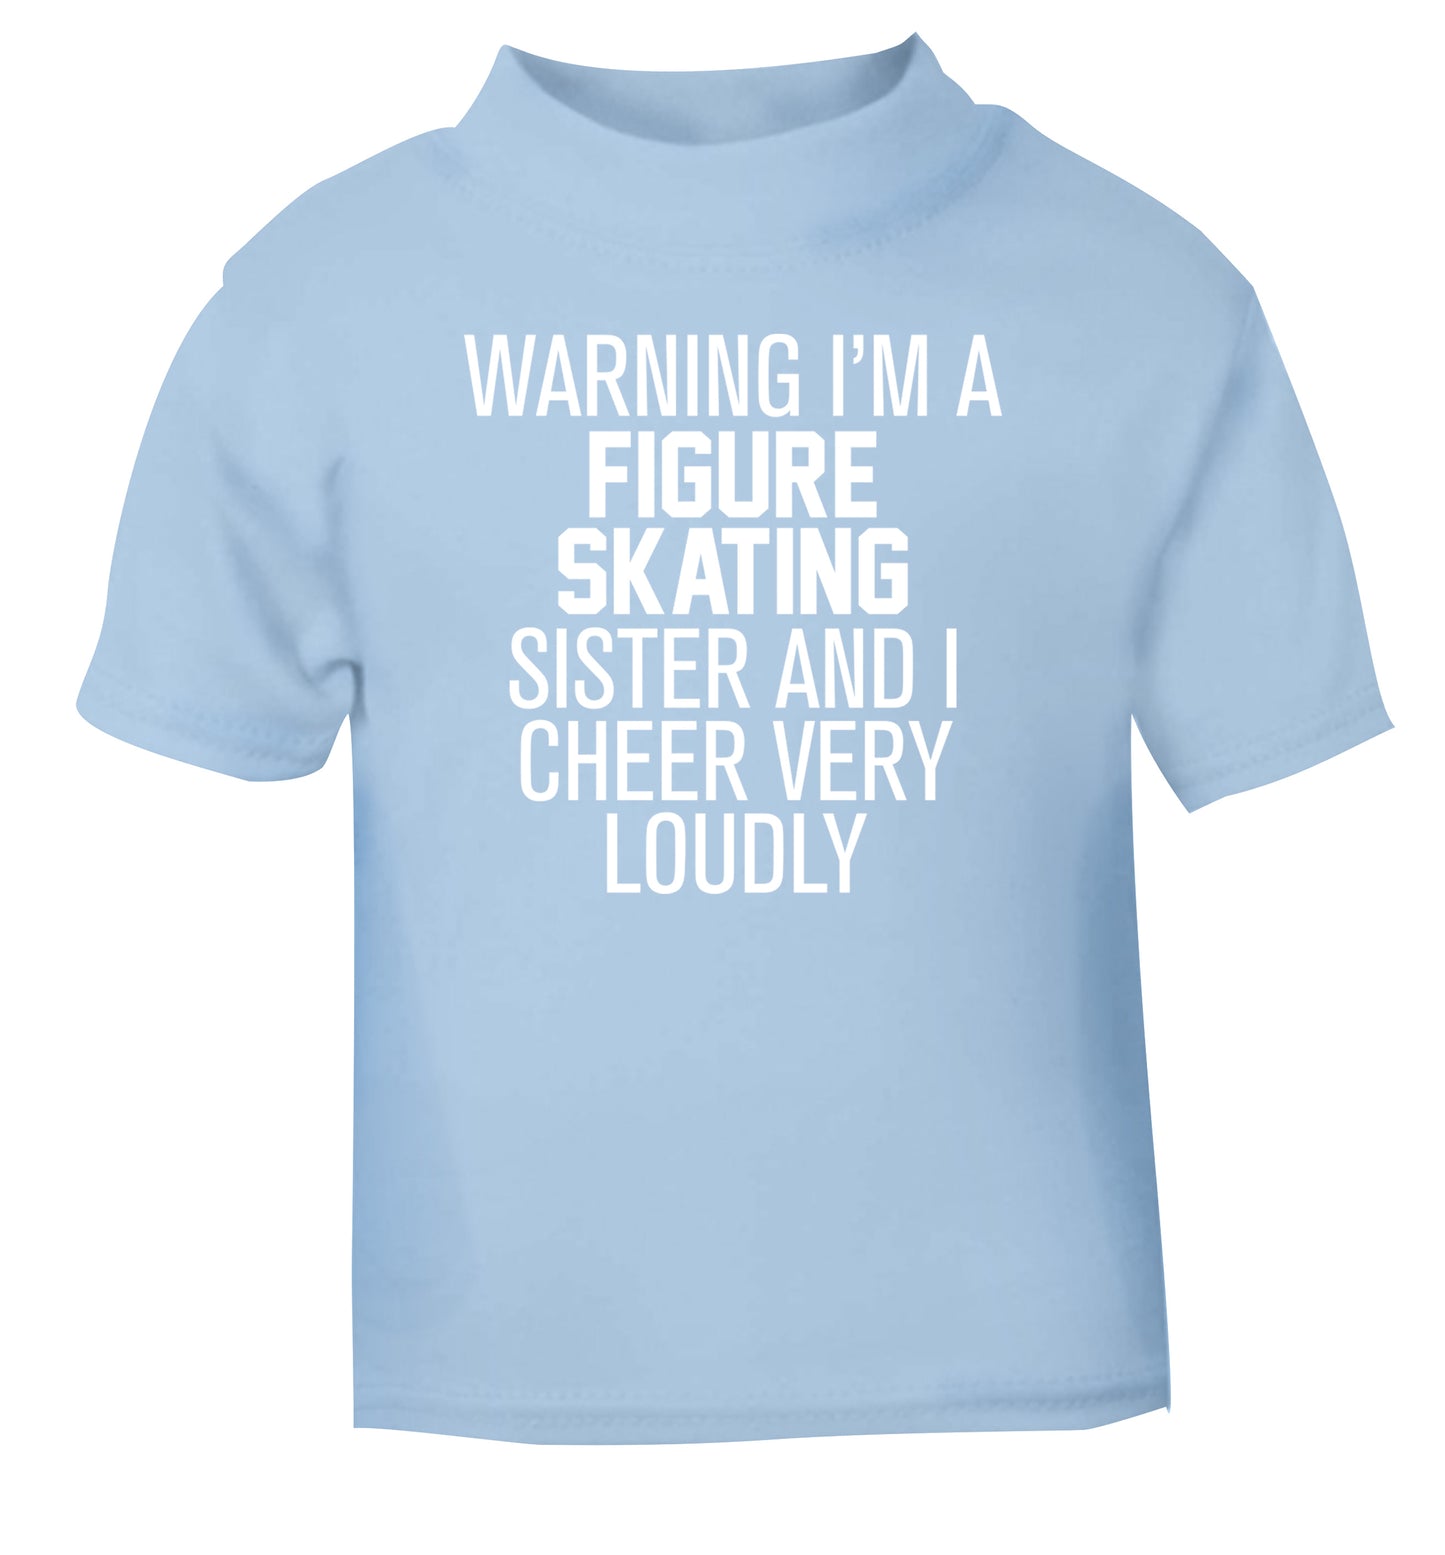 Warning I'm a figure skating sister and I cheer very loudly light blue Baby Toddler Tshirt 2 Years